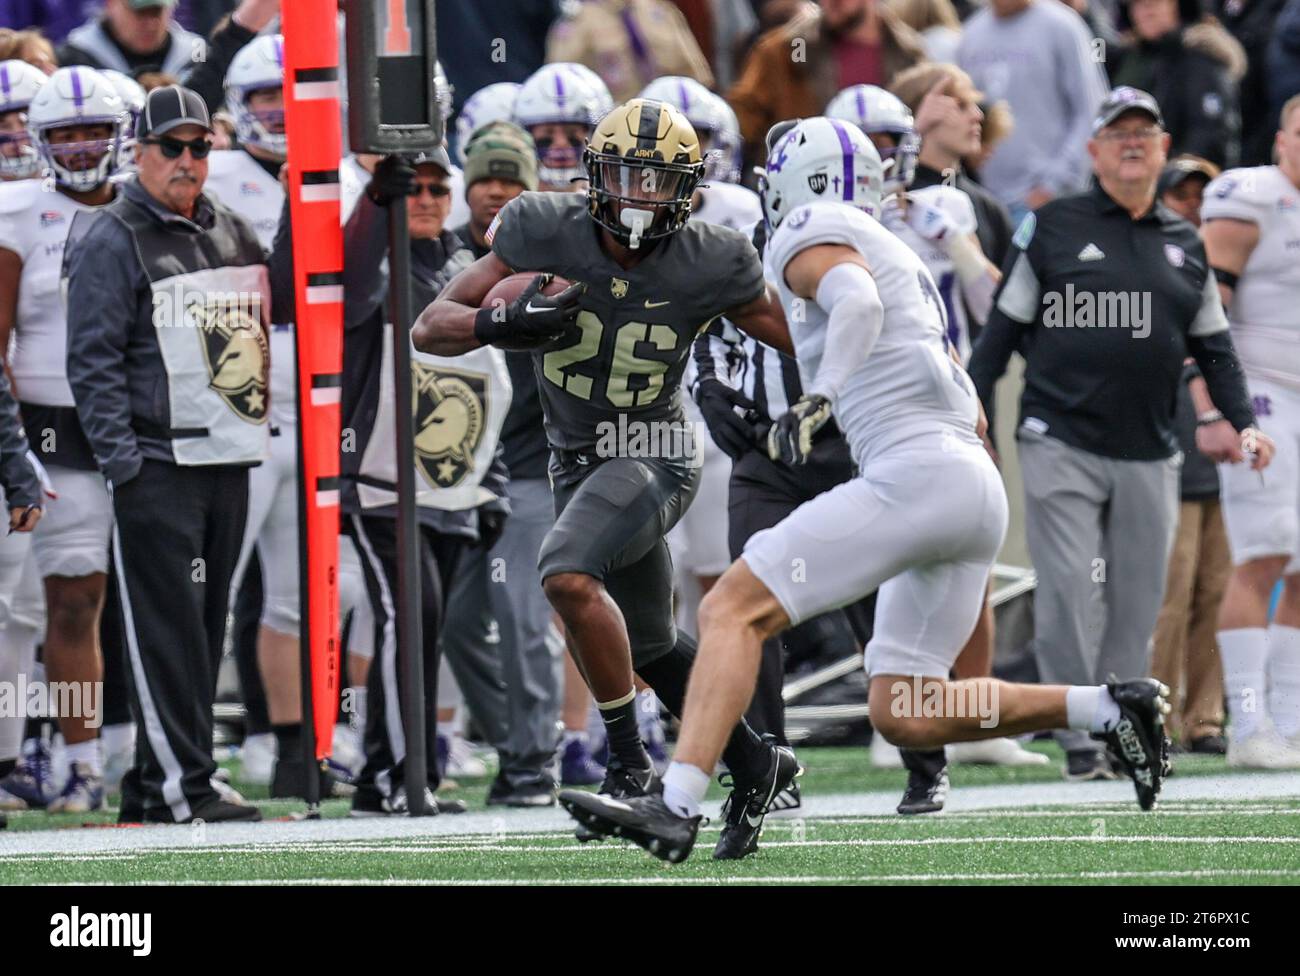 November 11, 2023: Army Black Knights running back Kanye Udoh (26) runs down the sideline during the NCAA football game between the Holy Cross Crusaders and the Army Black Knights at Michie Stadium in West Point, NY. Mike Langish/CSM Stock Photo